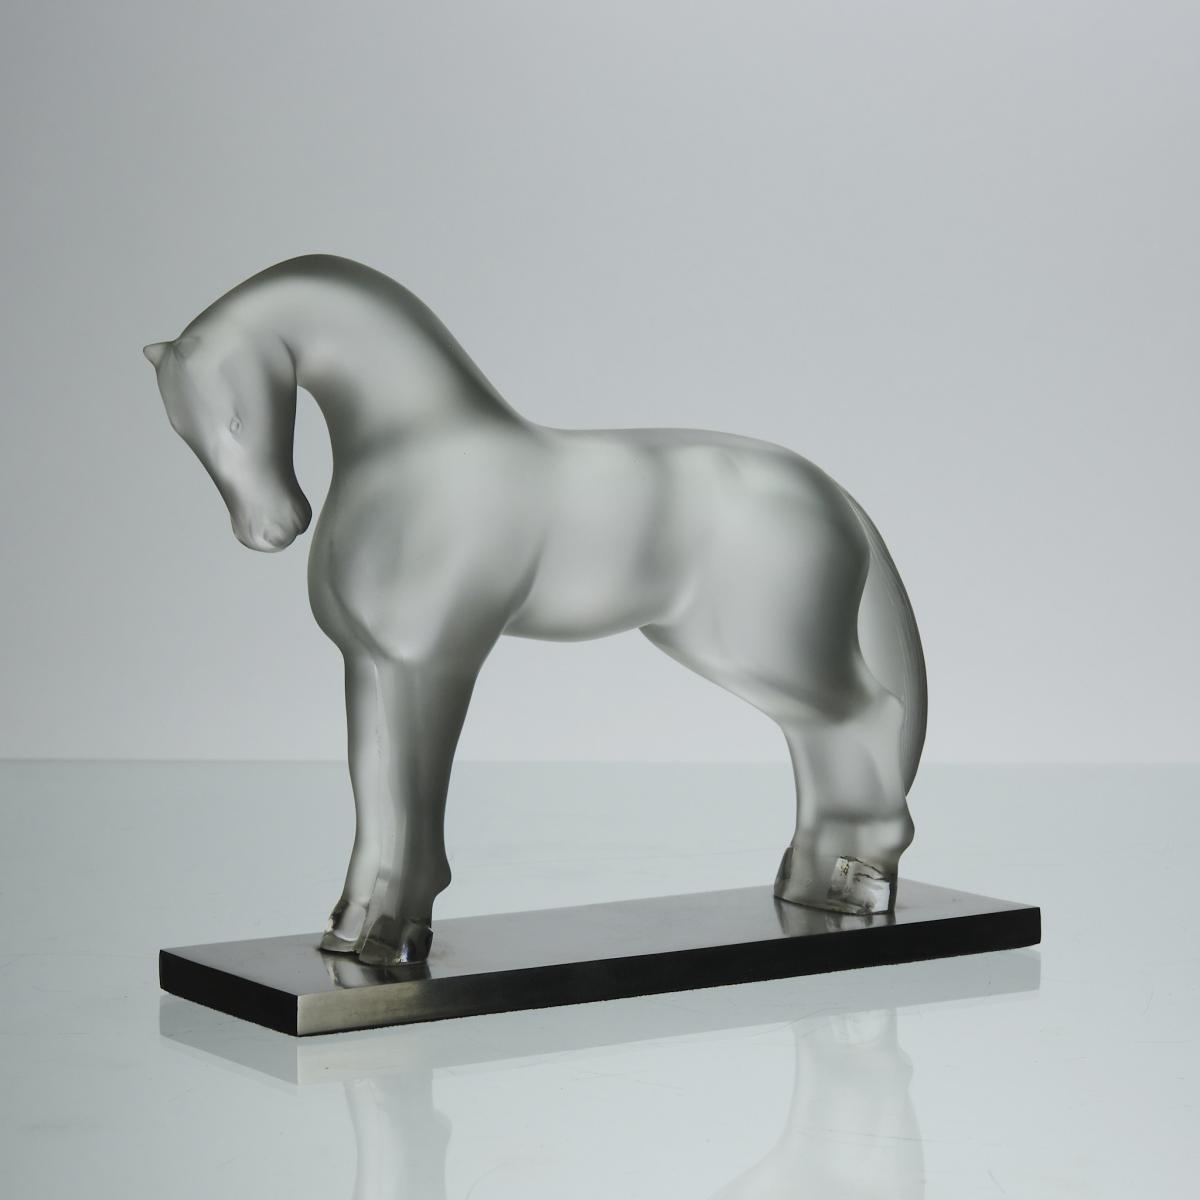 20th Century Frosted Glass Sculpture entitled "Cheval Debout" by Marc Lalique